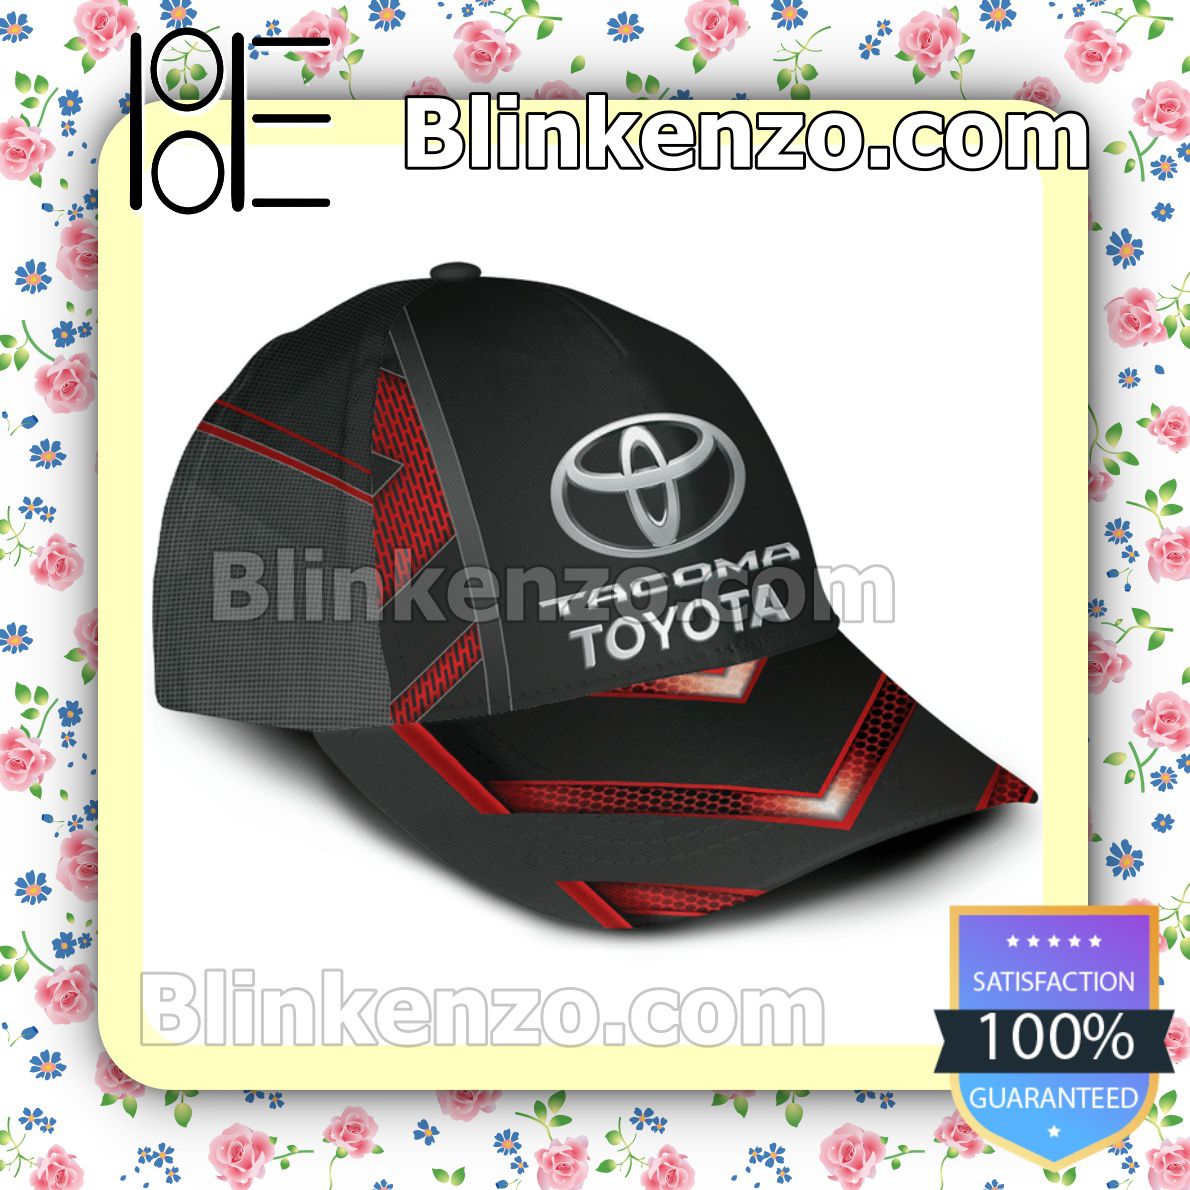 Free Ship Toyota Tacoma Black And Red Baseball Caps Gift For Boyfriend